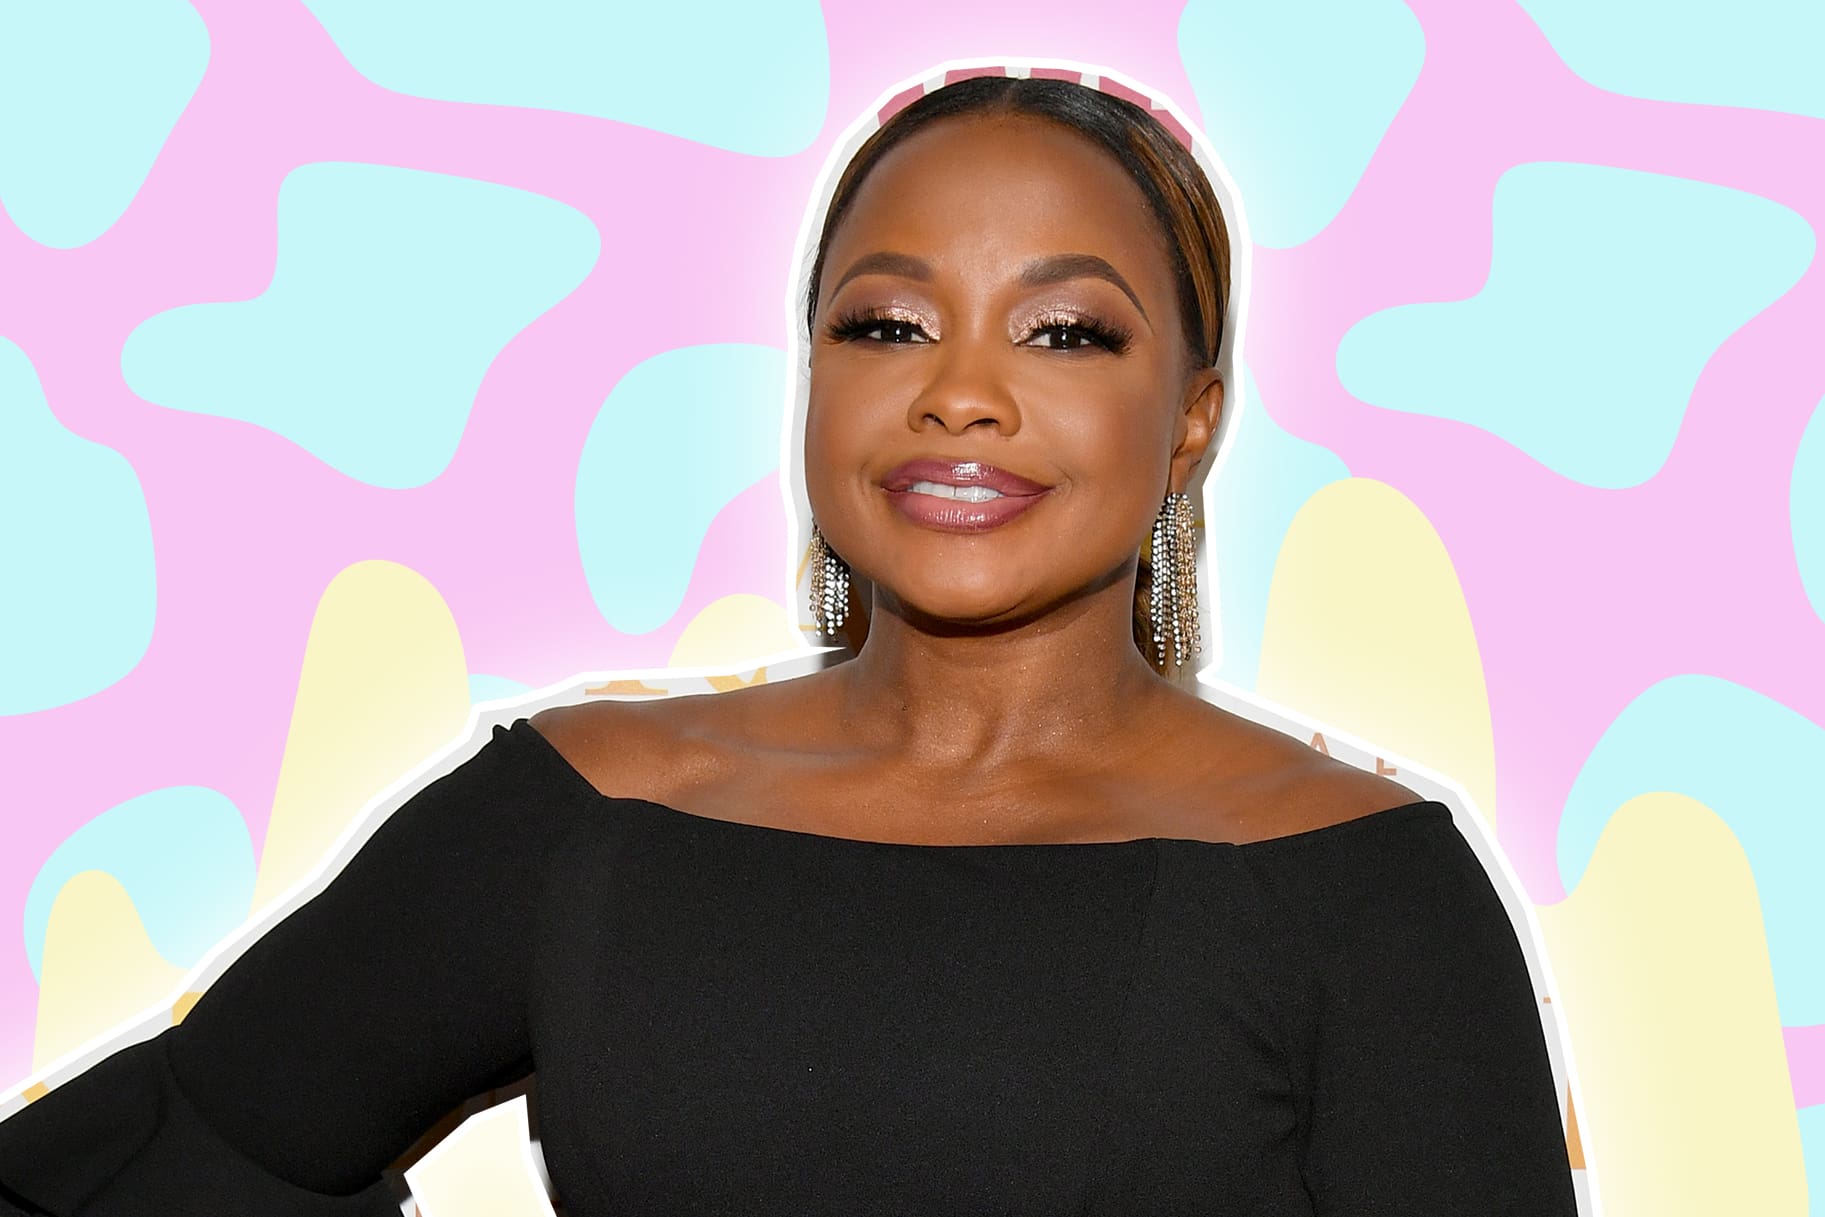 Phaedra Parks Reveals Fans What Remained Constant In 2020